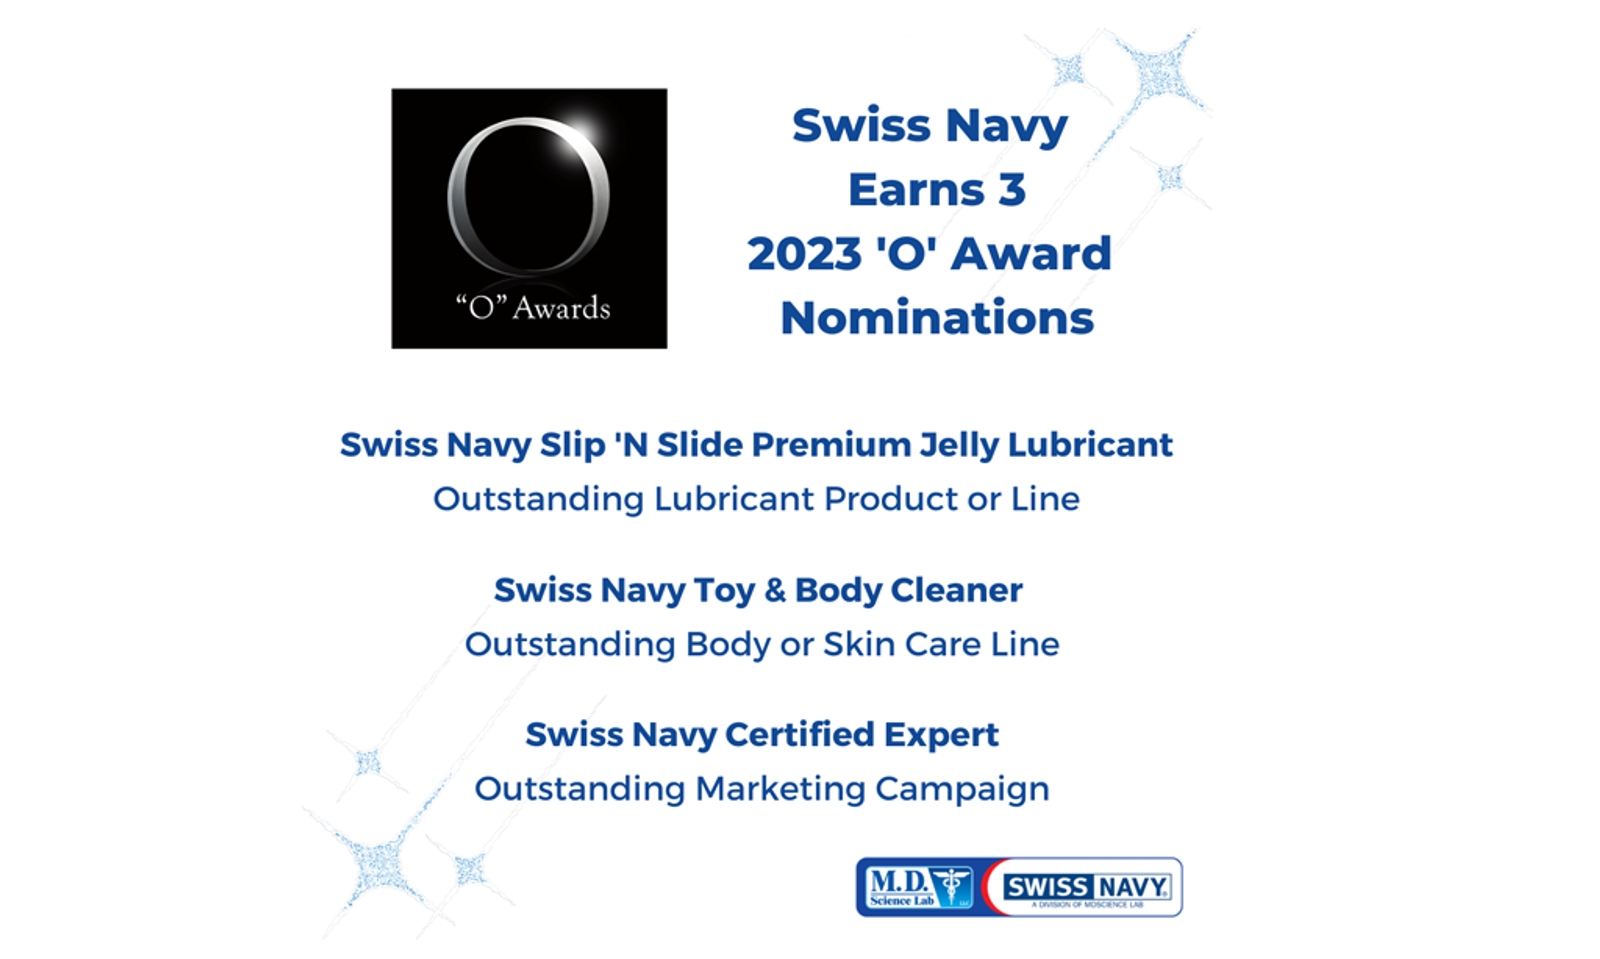 Swiss Navy Receives Three Nominations for the 2023 'O' Awards